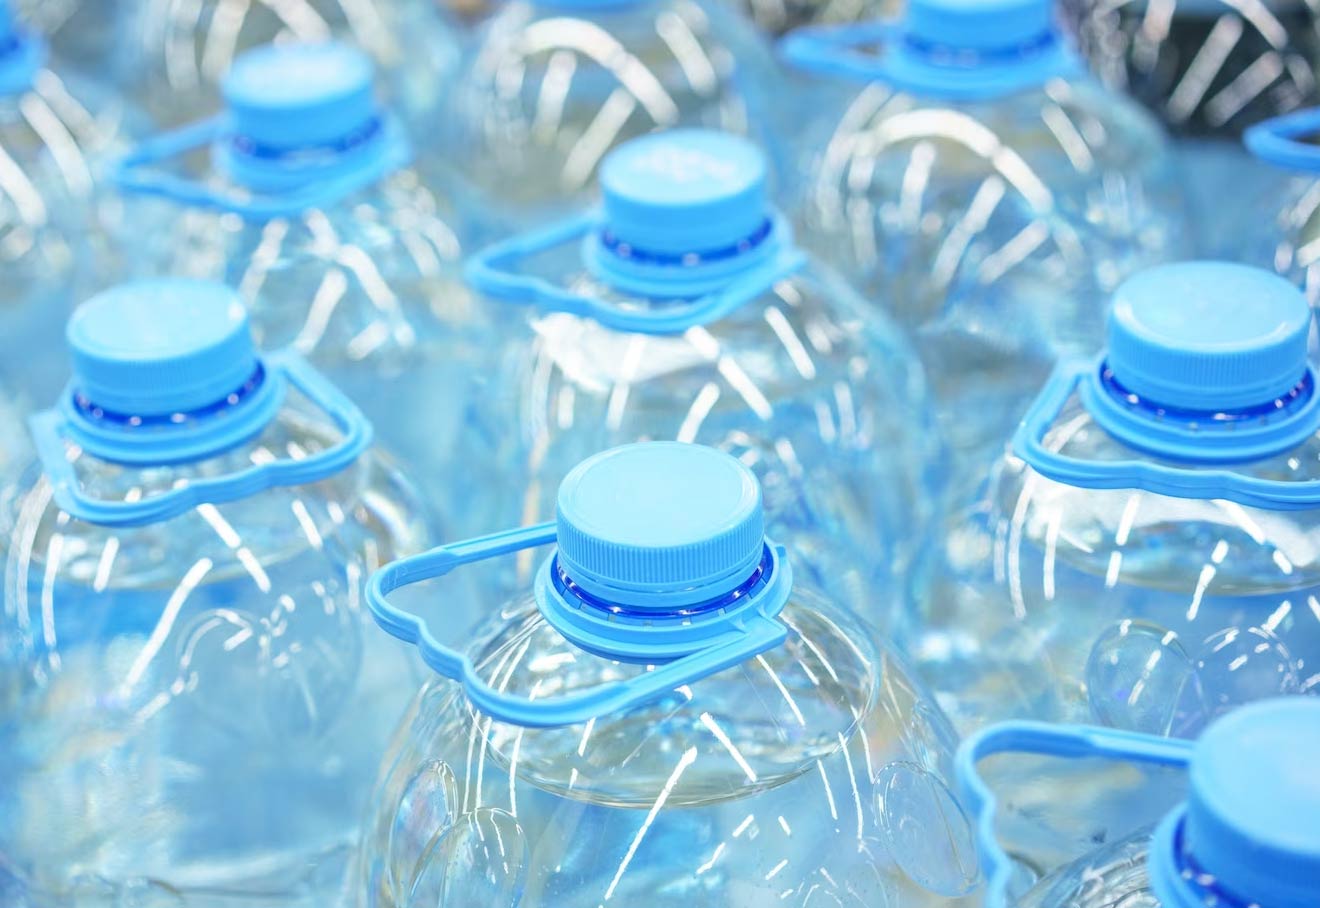 Packaged Drinking Water Manufacturers Demand Assam Govt To Roll Back Ban On PET bottles